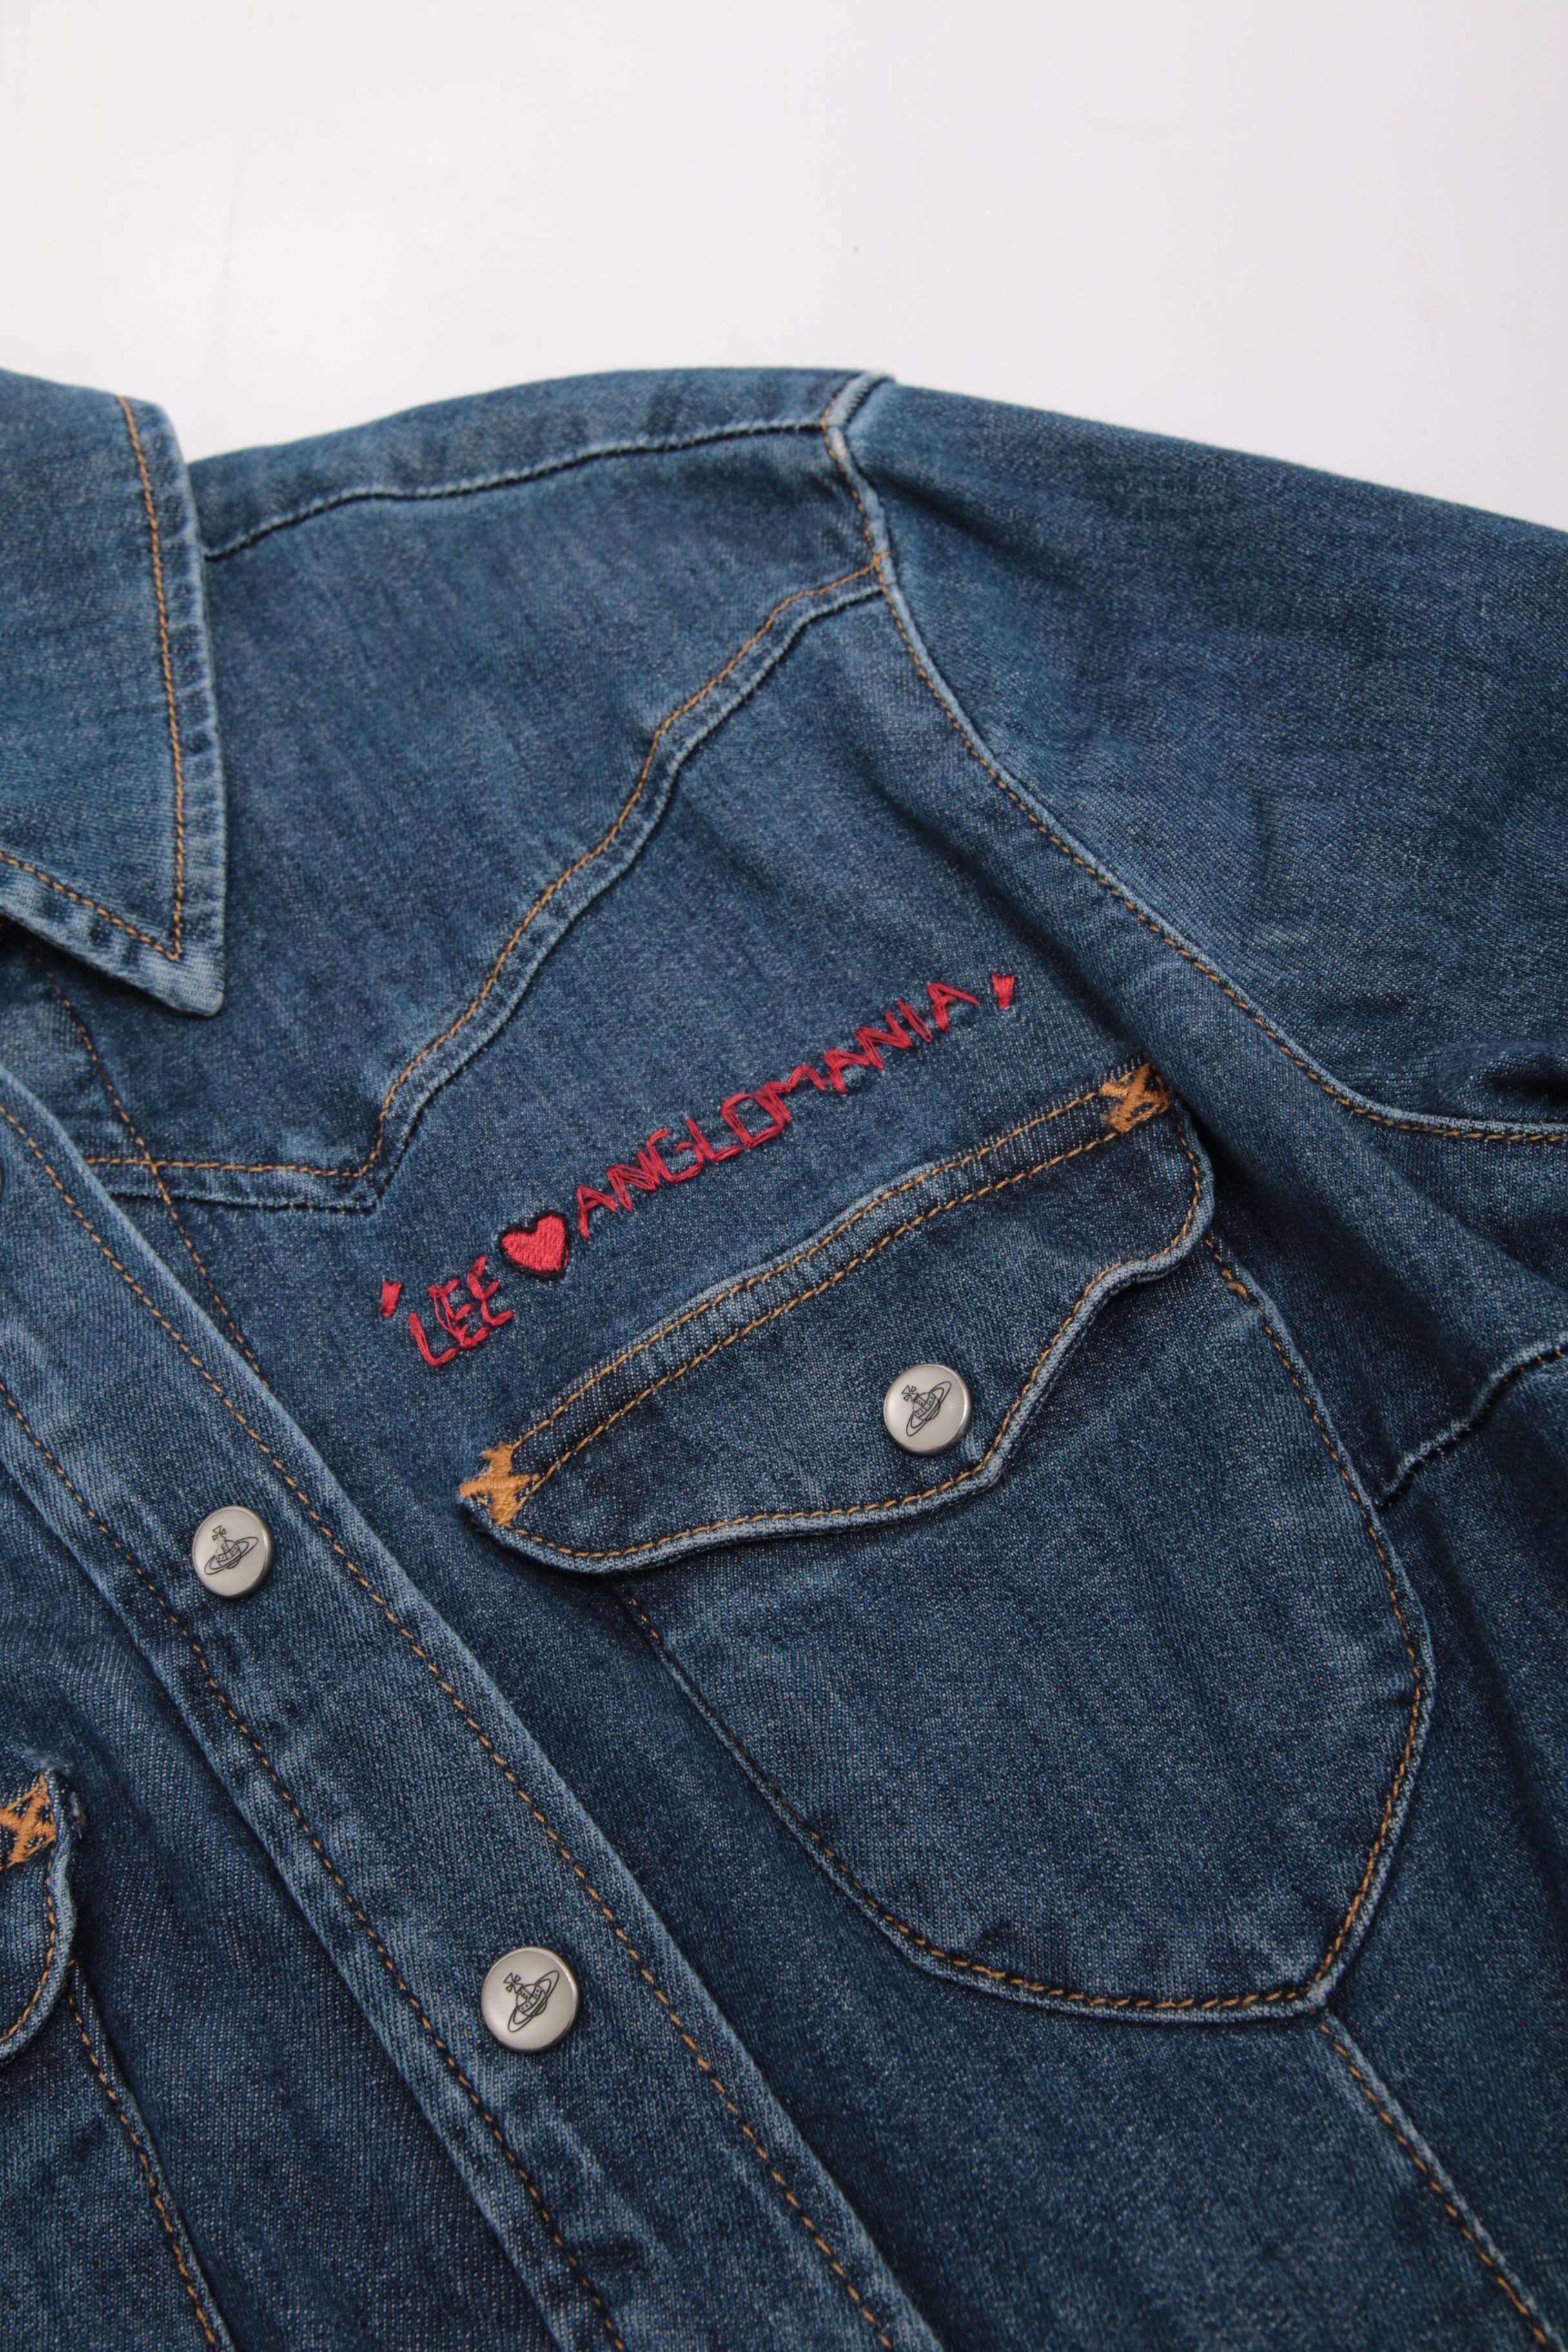 denim shirt | be-cause - style, travel, collecting and food blog